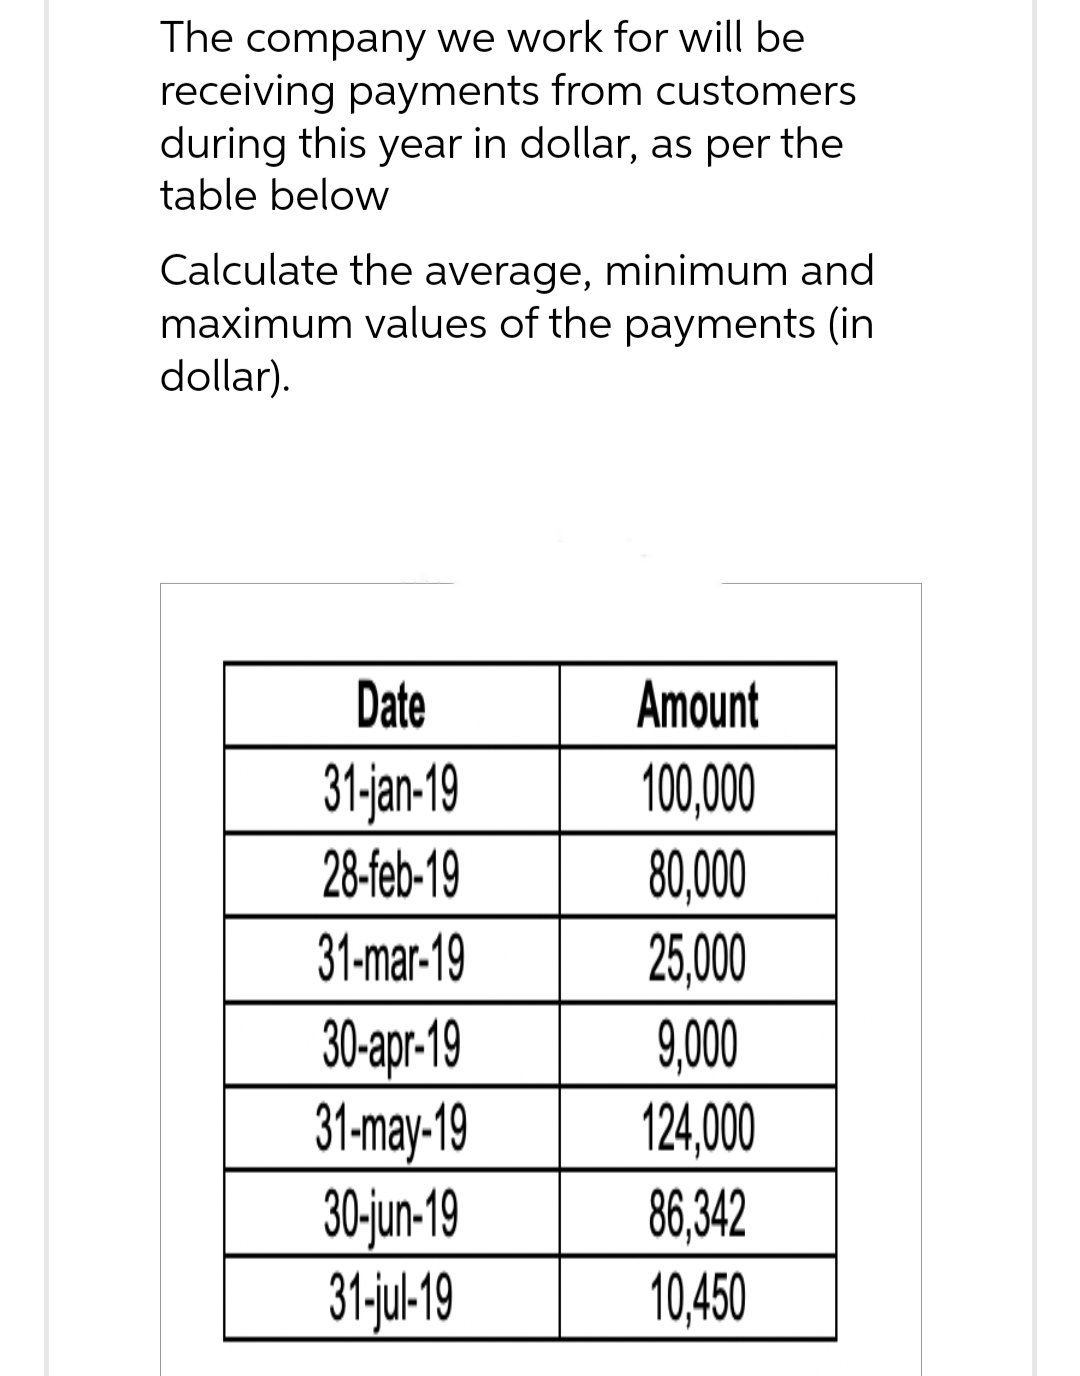 The company we work for will be
receiving payments from customers
during this year in dollar, as per the
table below
Calculate the average, minimum and
maximum values of the payments (in
dollar).
Date
31-jan-19
28-feb-19
31-mar-19
30-apr-19
31-may-19
30-jun-19
31-jul-19
Amount
100,000
80,000
25,000
9,000
124,000
86,342
10,450